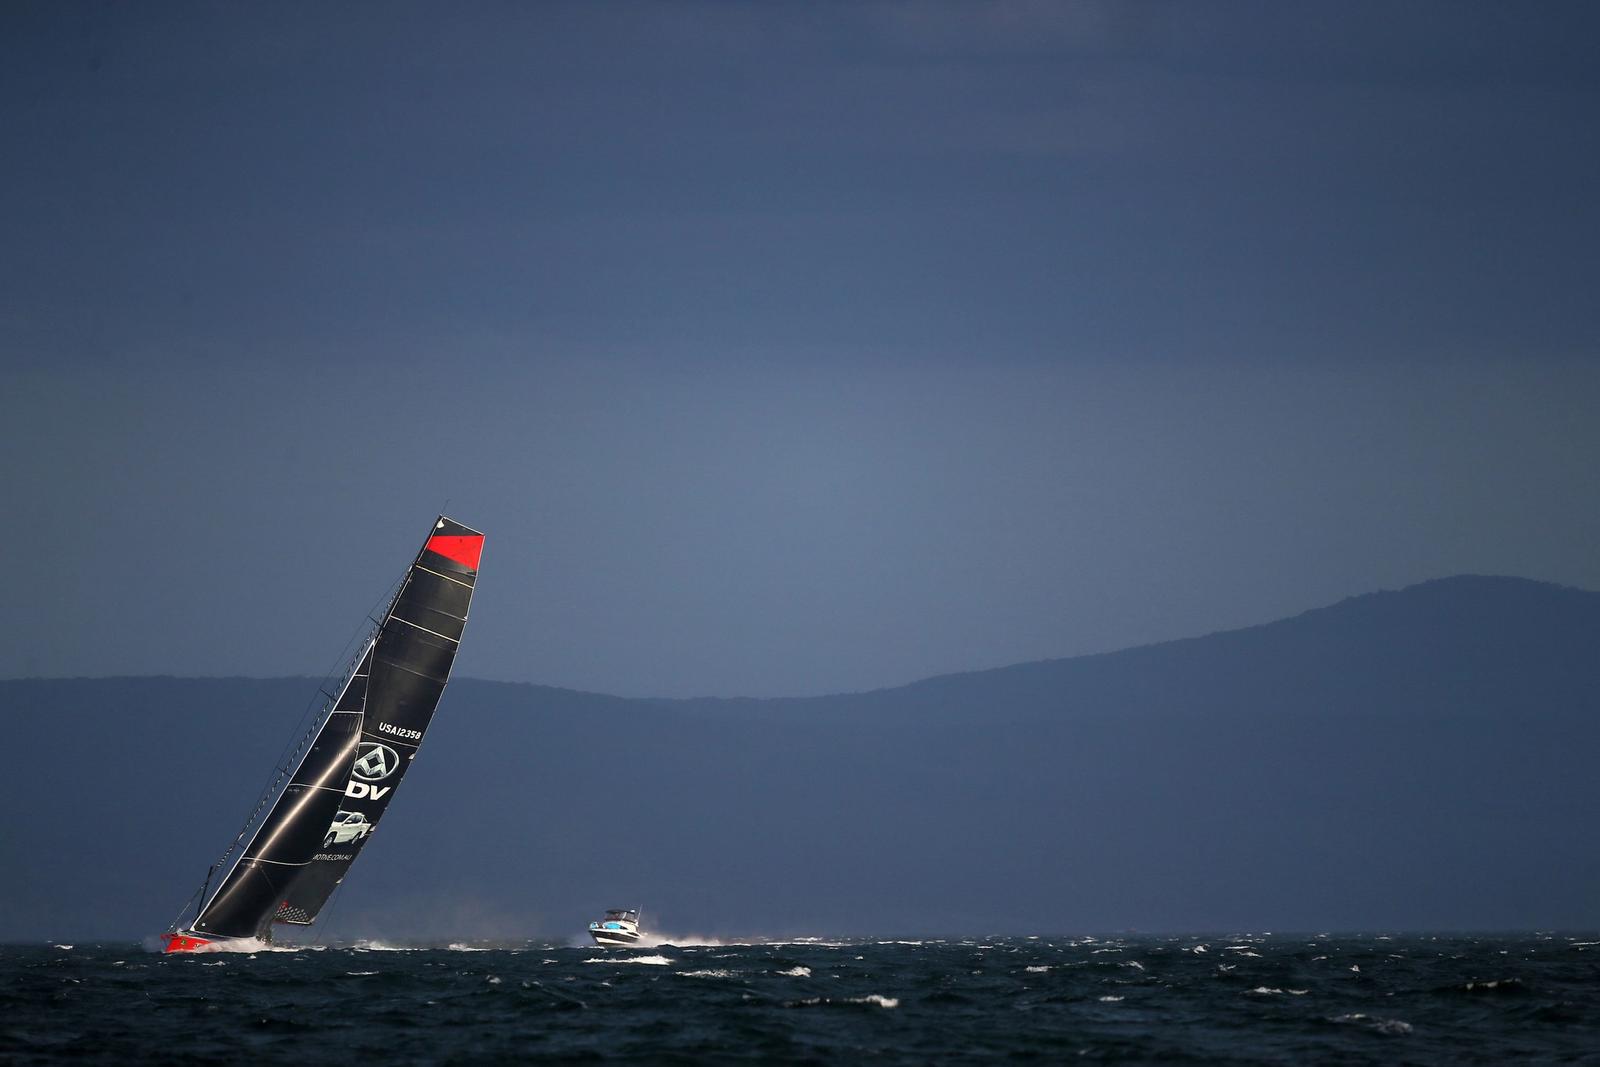 LDV Comanche sails across Storm Bay in Tasmania during the 2017 Rolex Sydney to